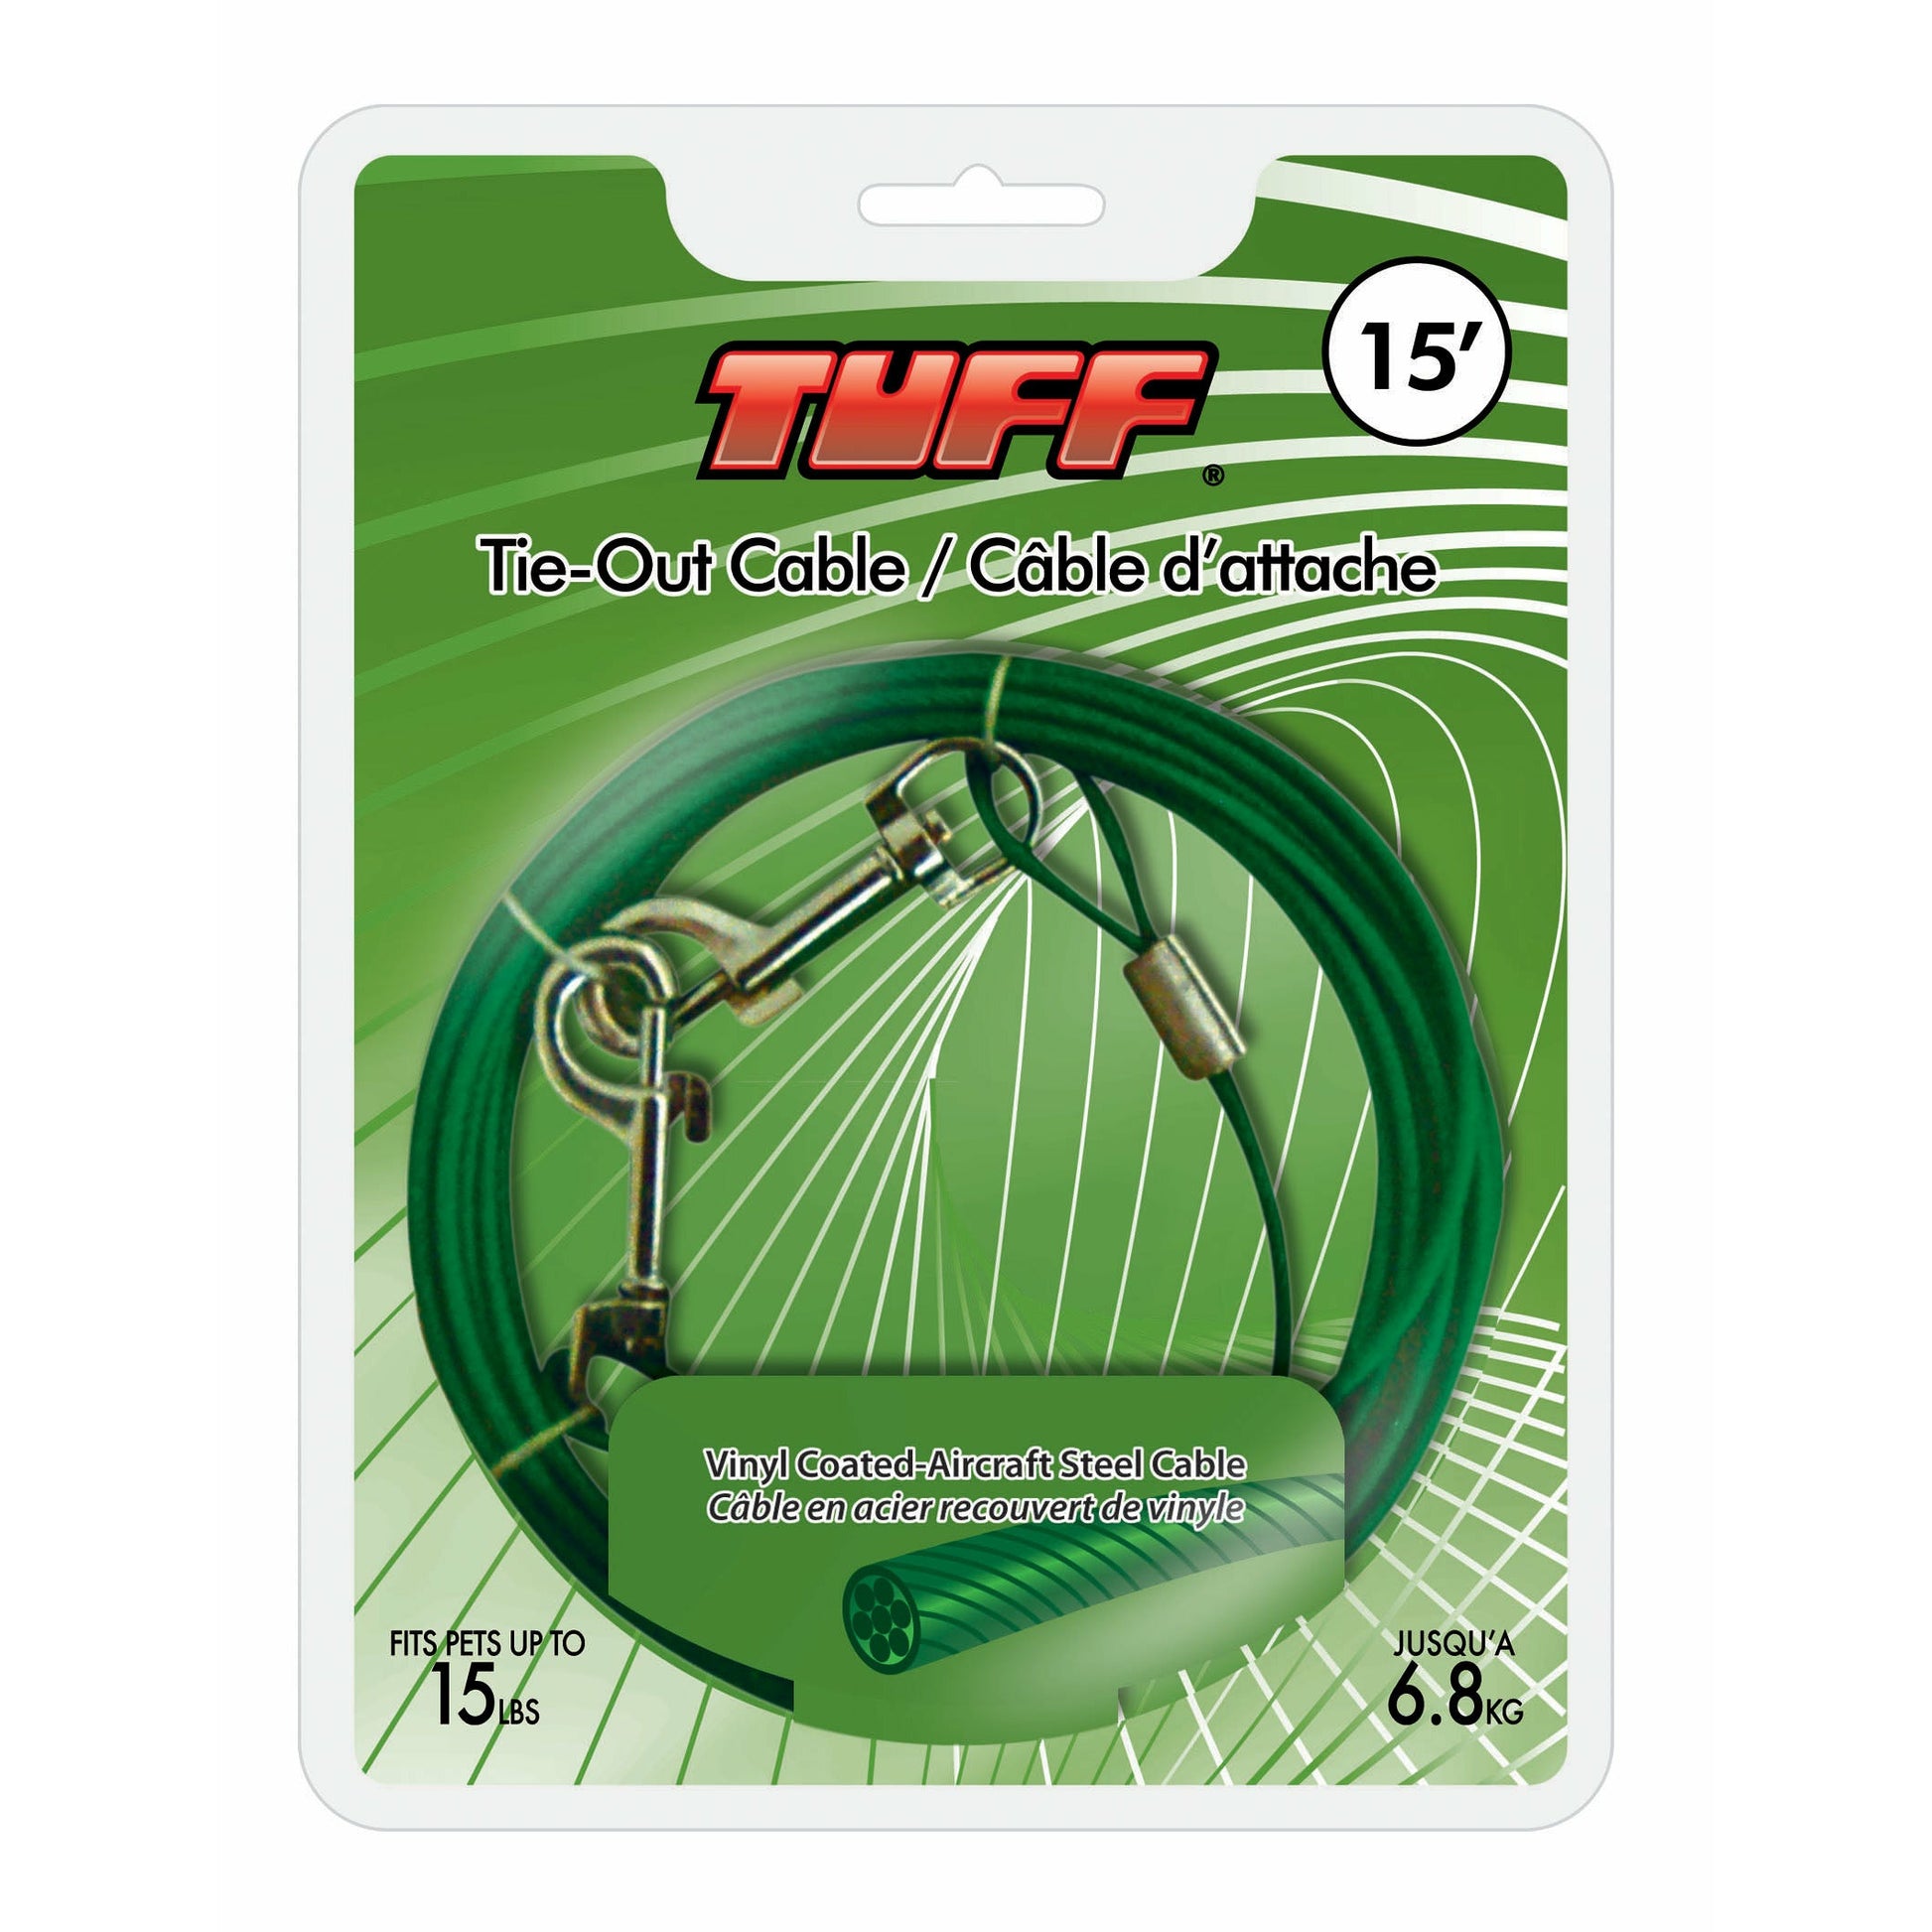 Tuff Tie Out Cable Tiny 15' Tie Outs 15' | PetMax Canada